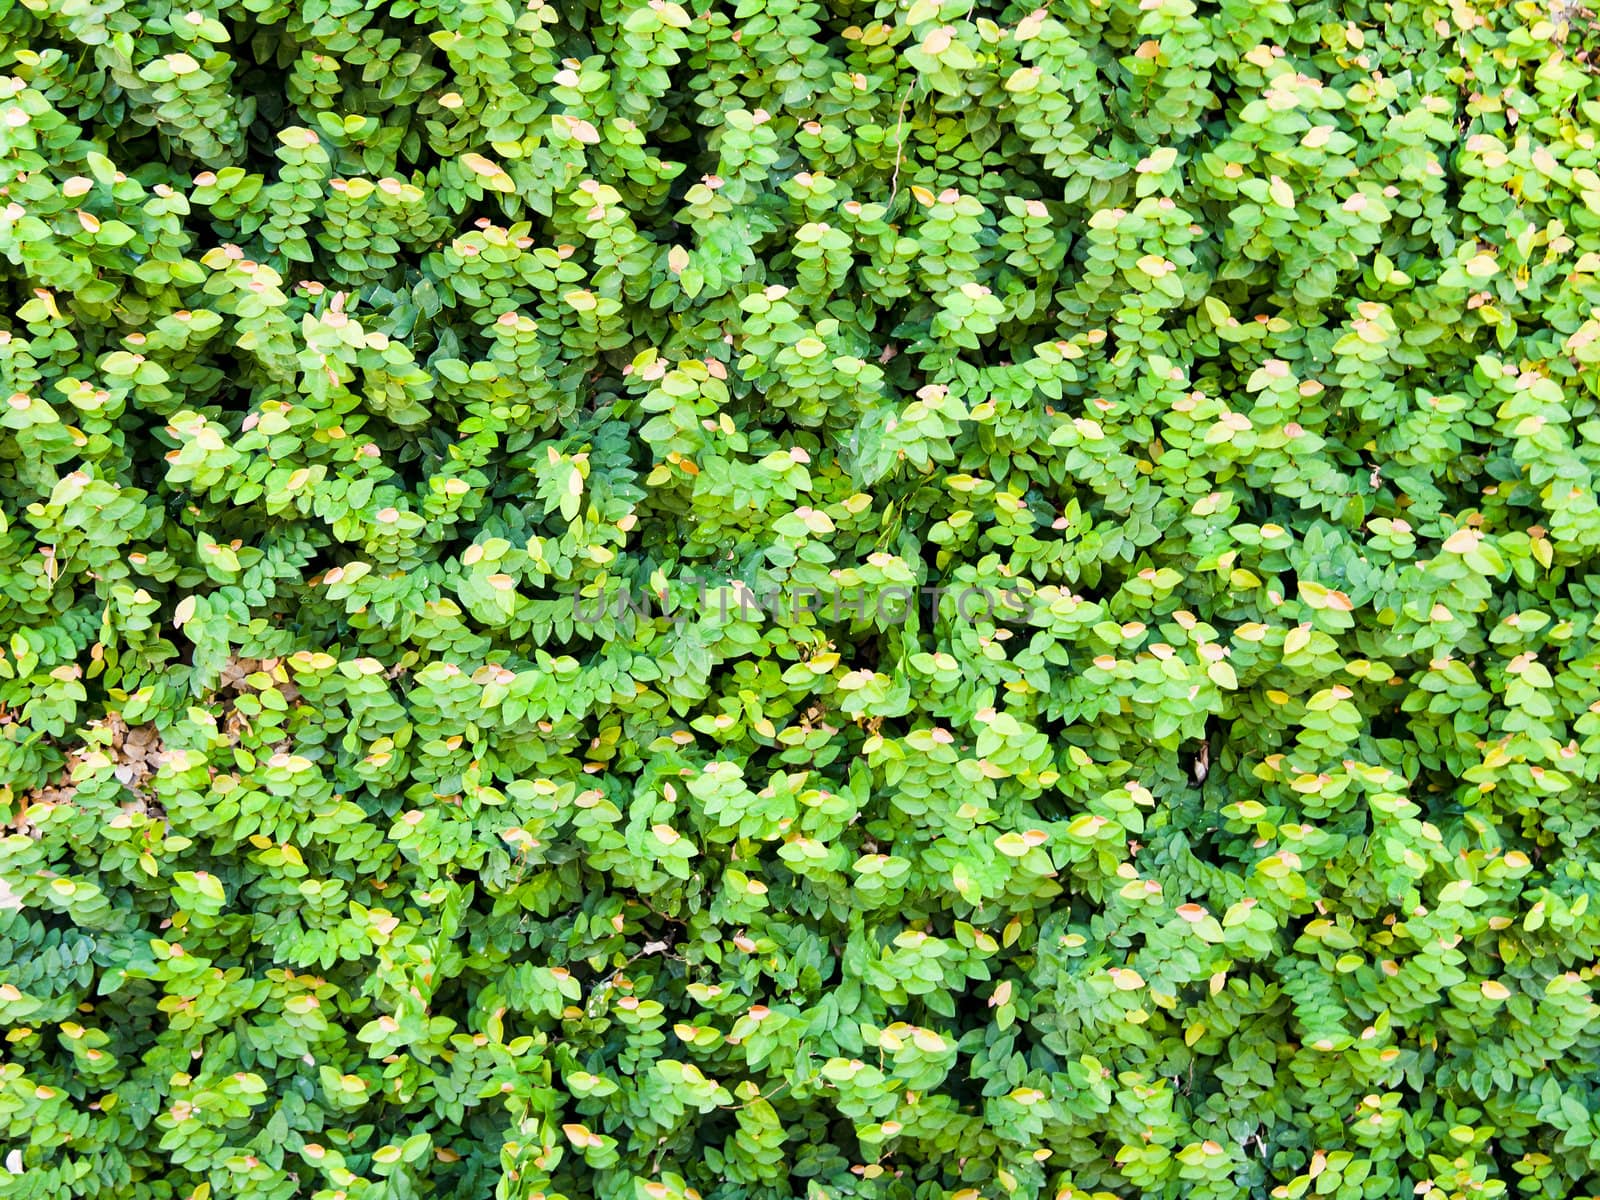 Green wall of Ivy leaves, nature background, texture